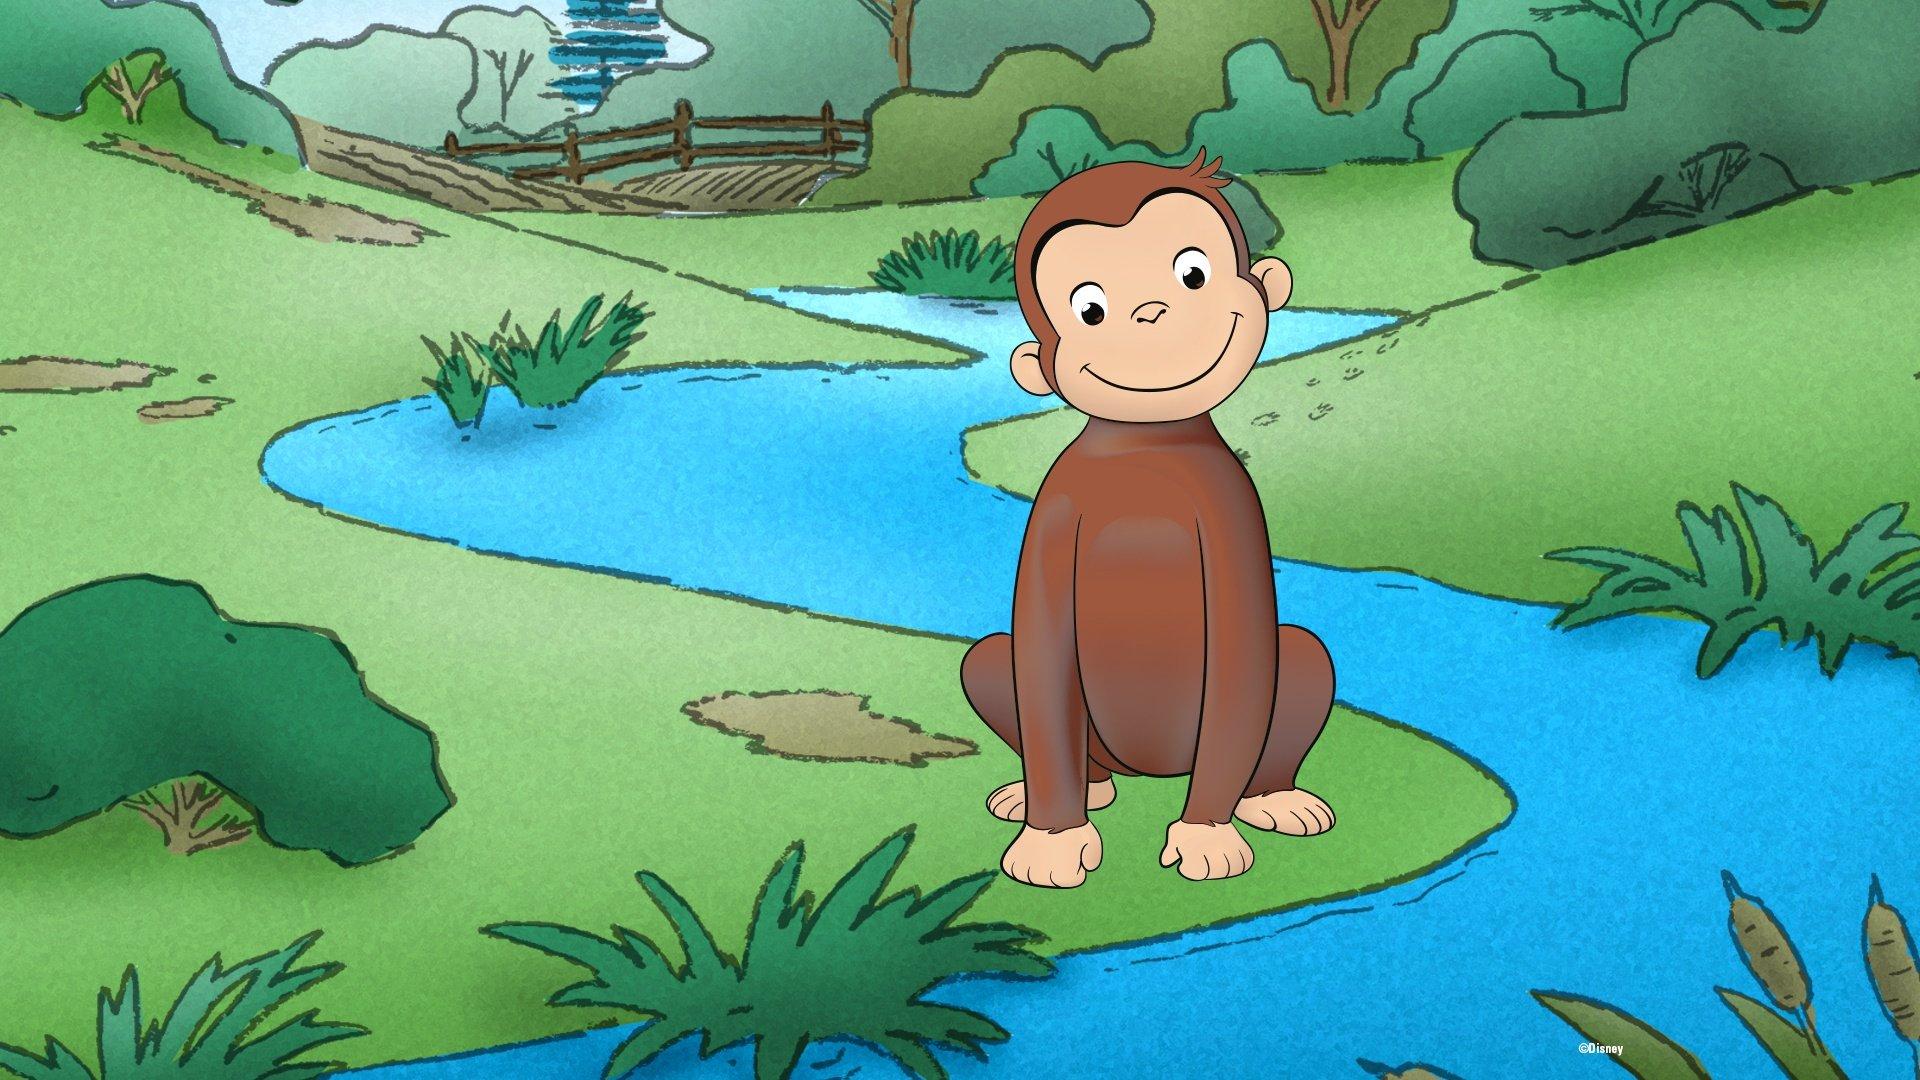 Curioso come George - Stag. 2 Ep. 6